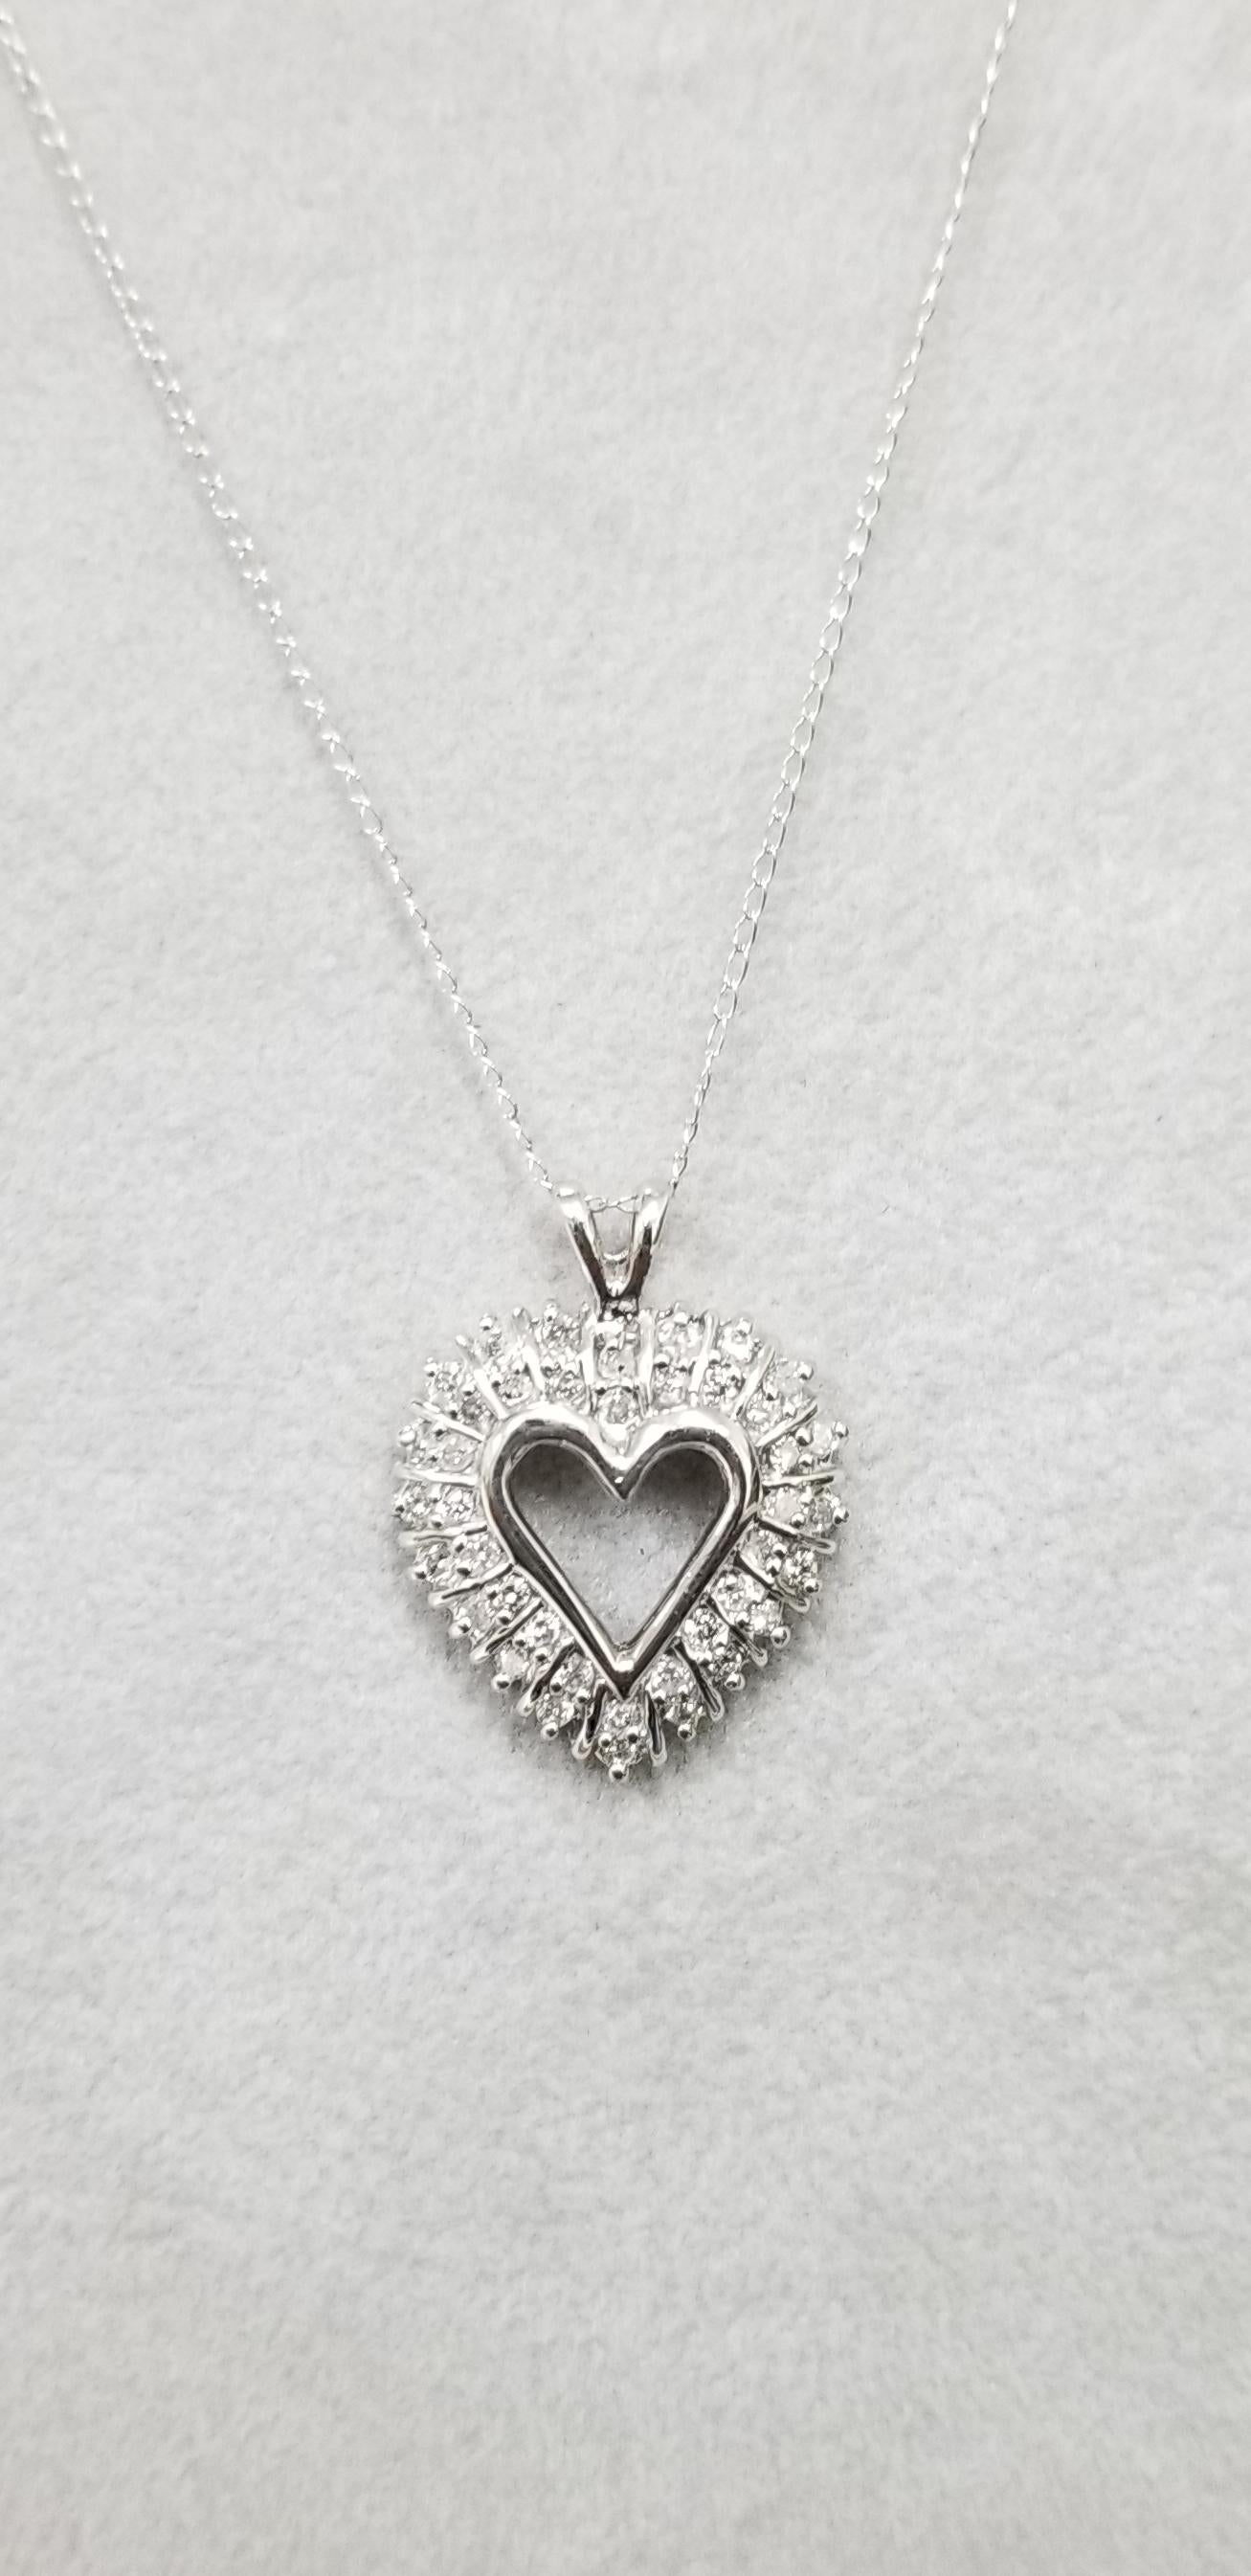 14k white gold diamond heart necklace, containing 40 round full cut diamonds of good quality weighing .60pts. on a 16 inch chain.